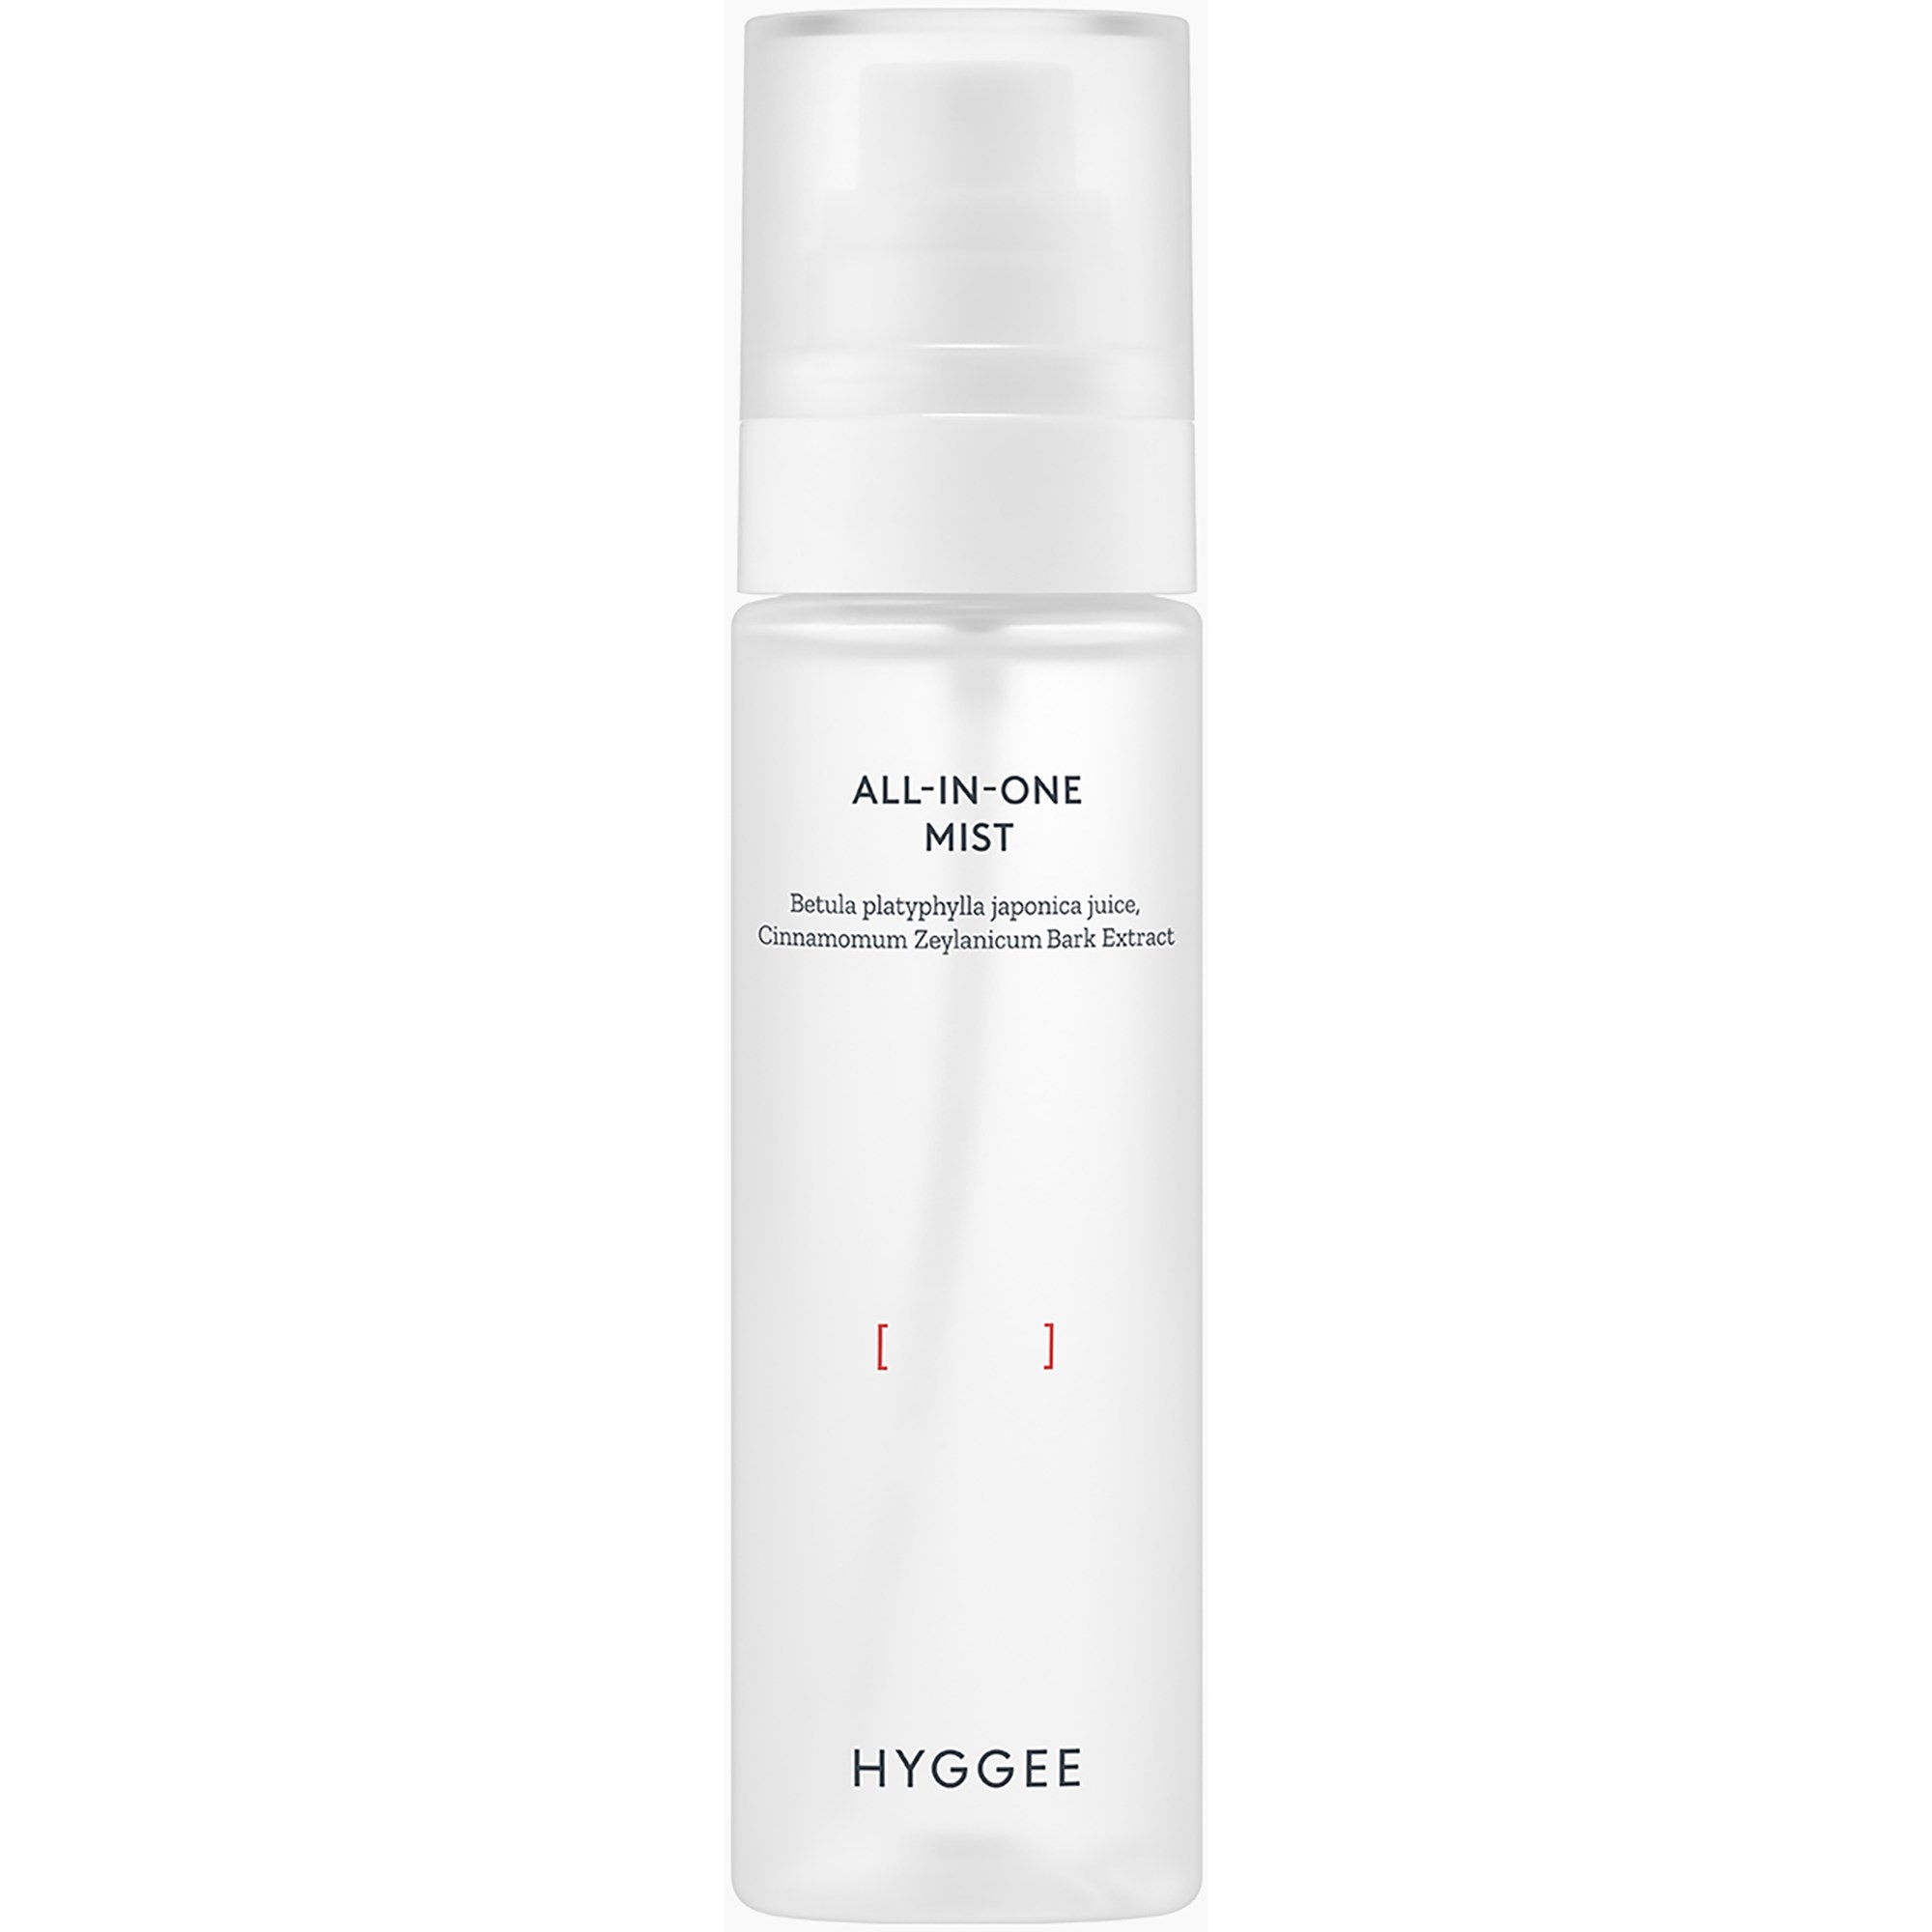 HYGGEE All-in-One Mist 100 ml